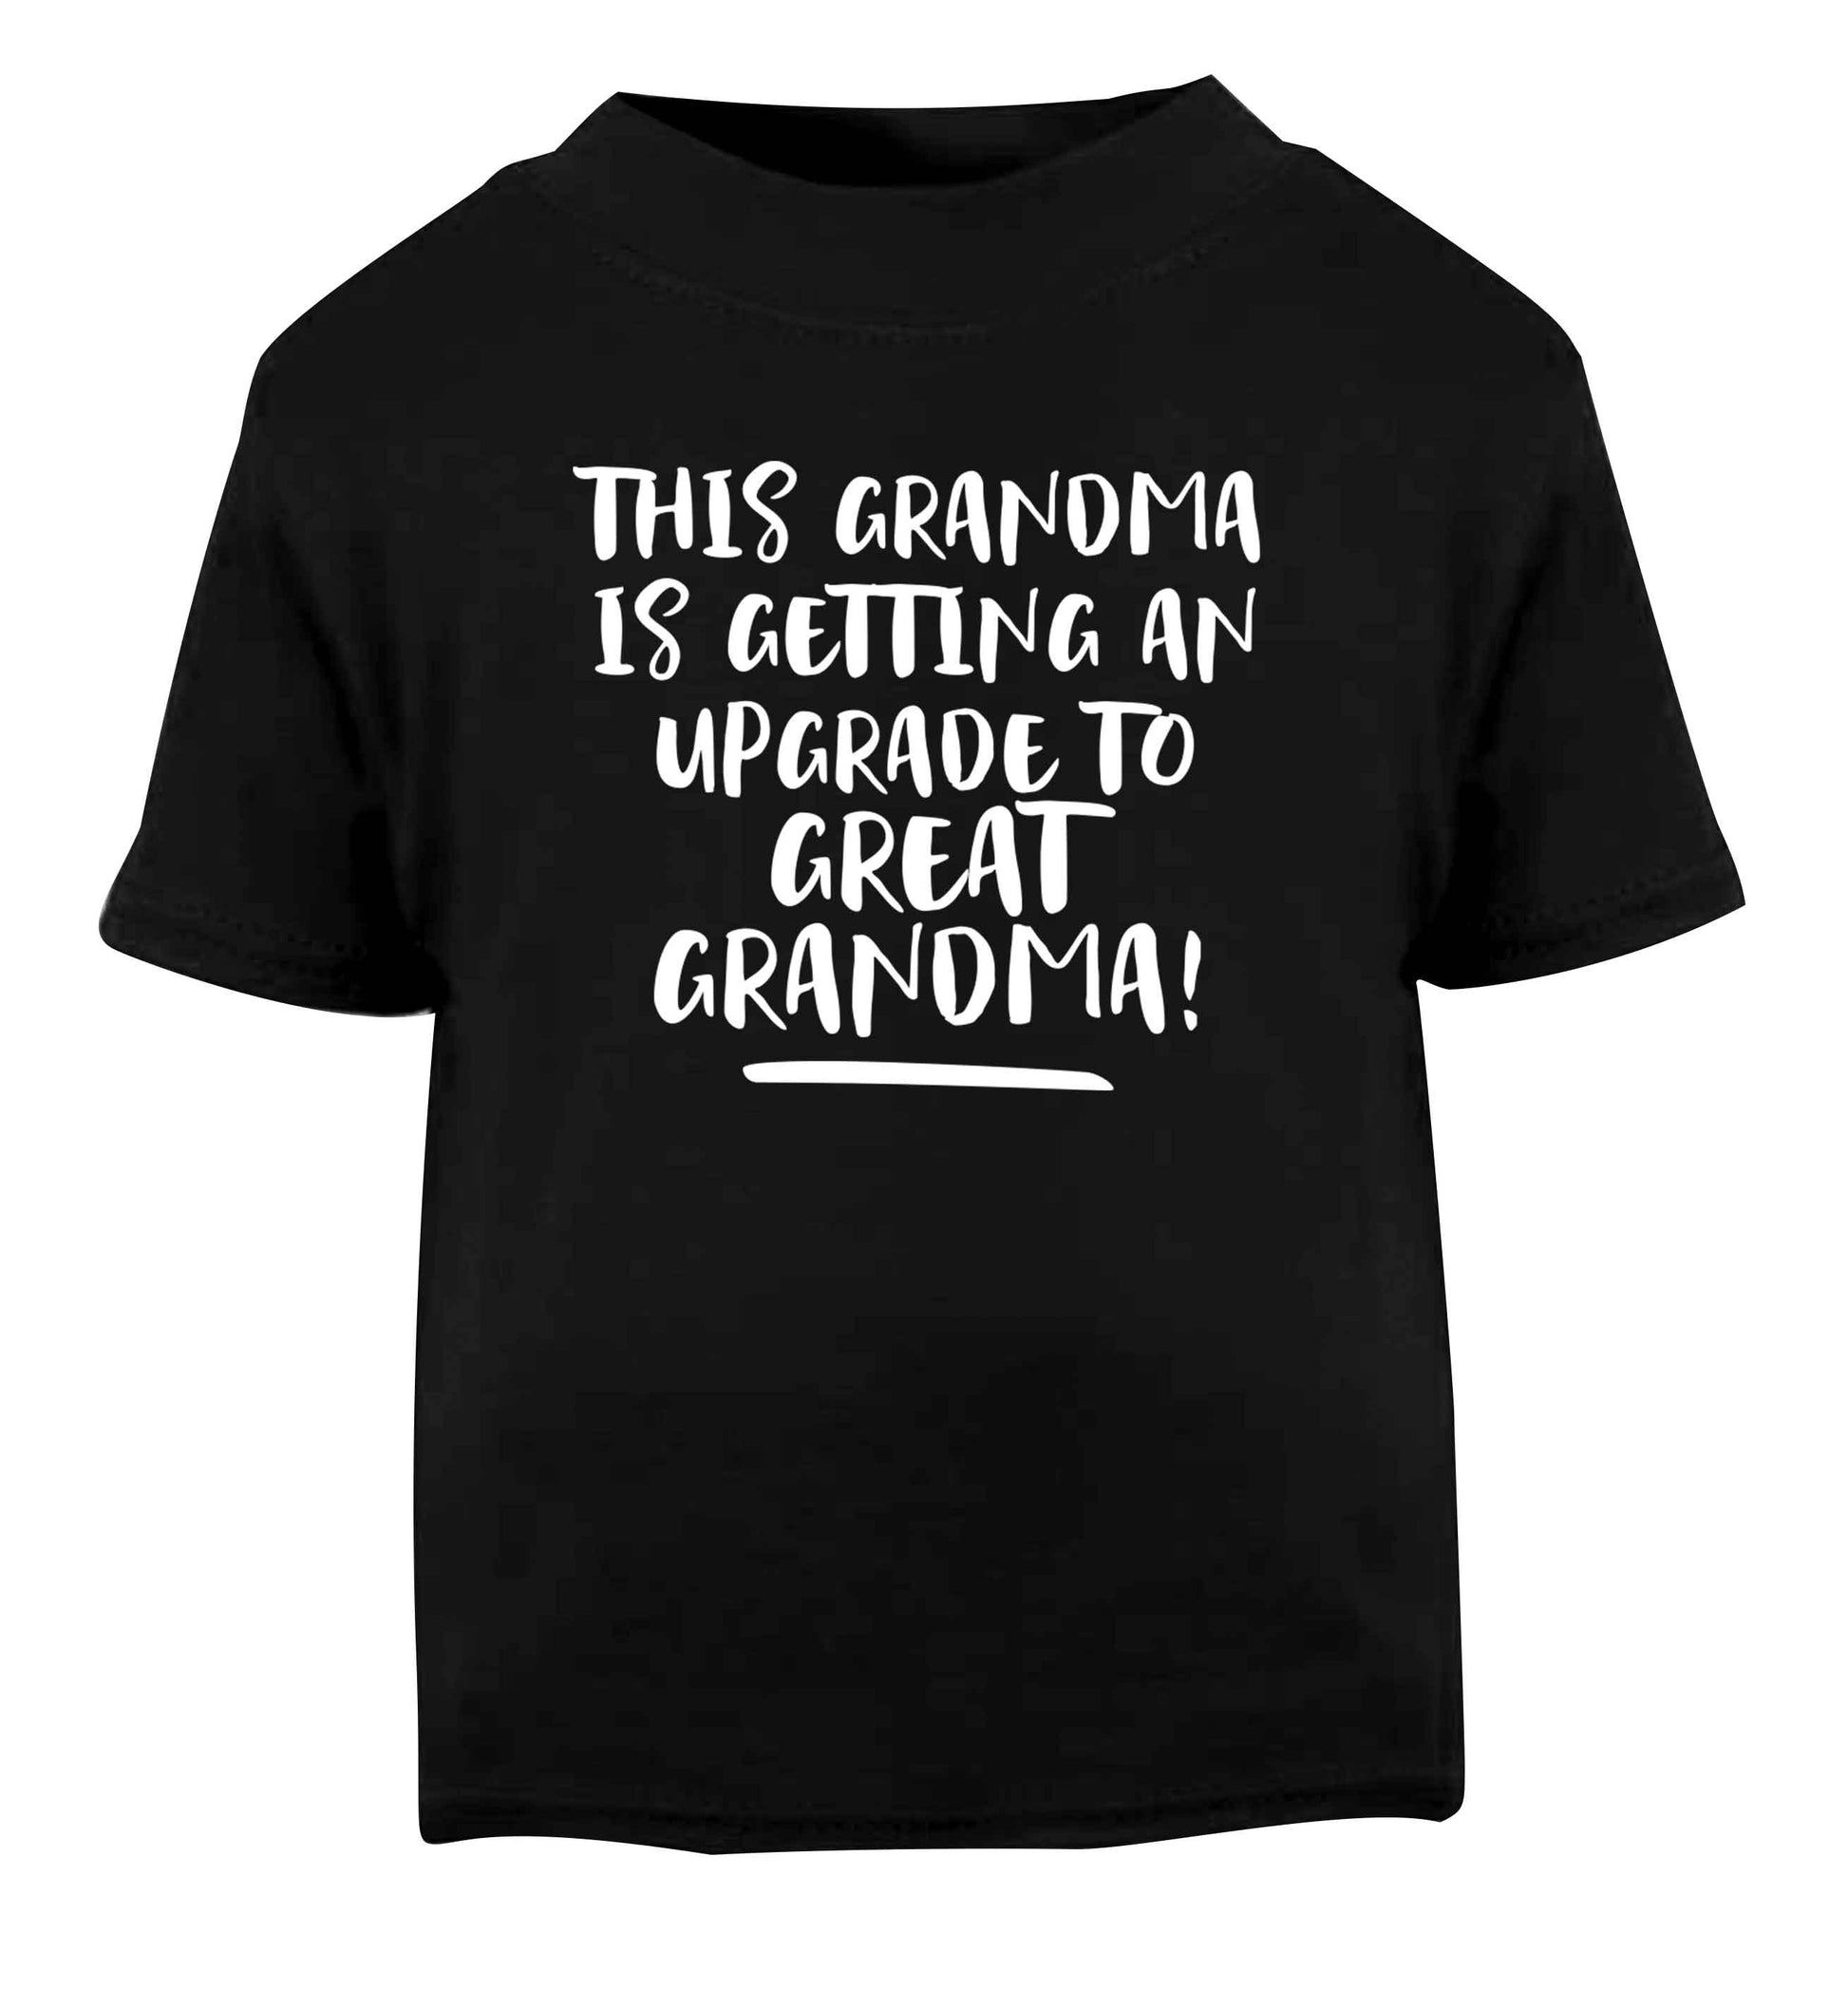 This grandma is getting an upgrade to great grandma! Black Baby Toddler Tshirt 2 years